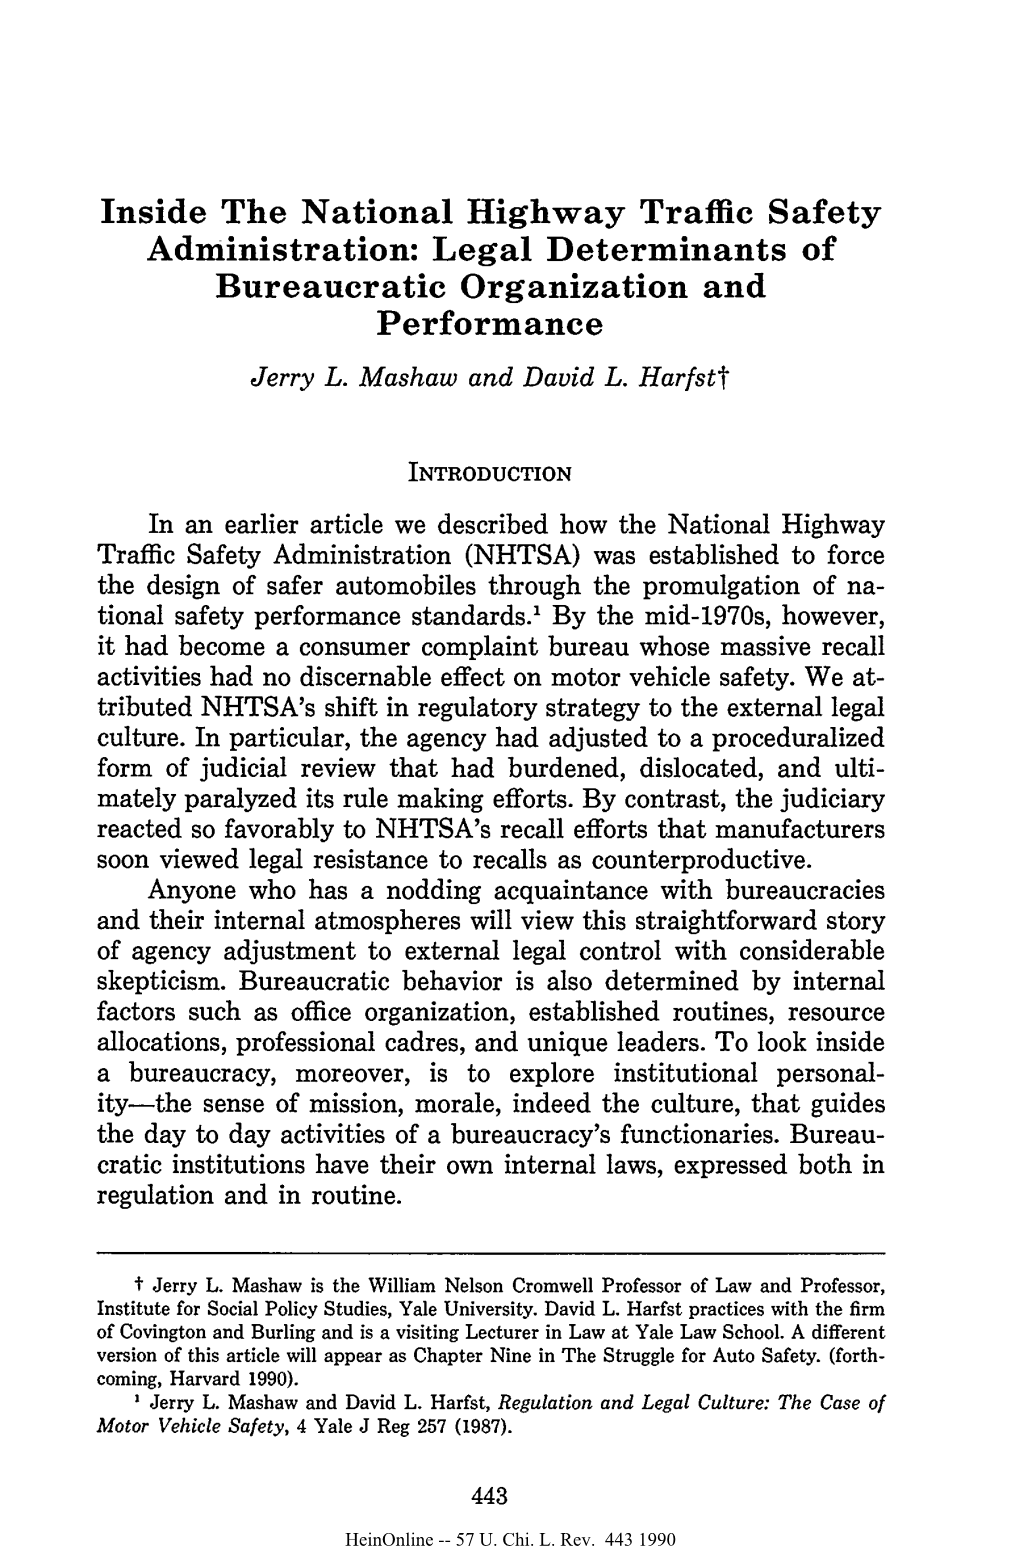 Inside the National Highway Traffic Safety Administration: Legal Determinants of Bureaucratic Organization and Performance Jerry L